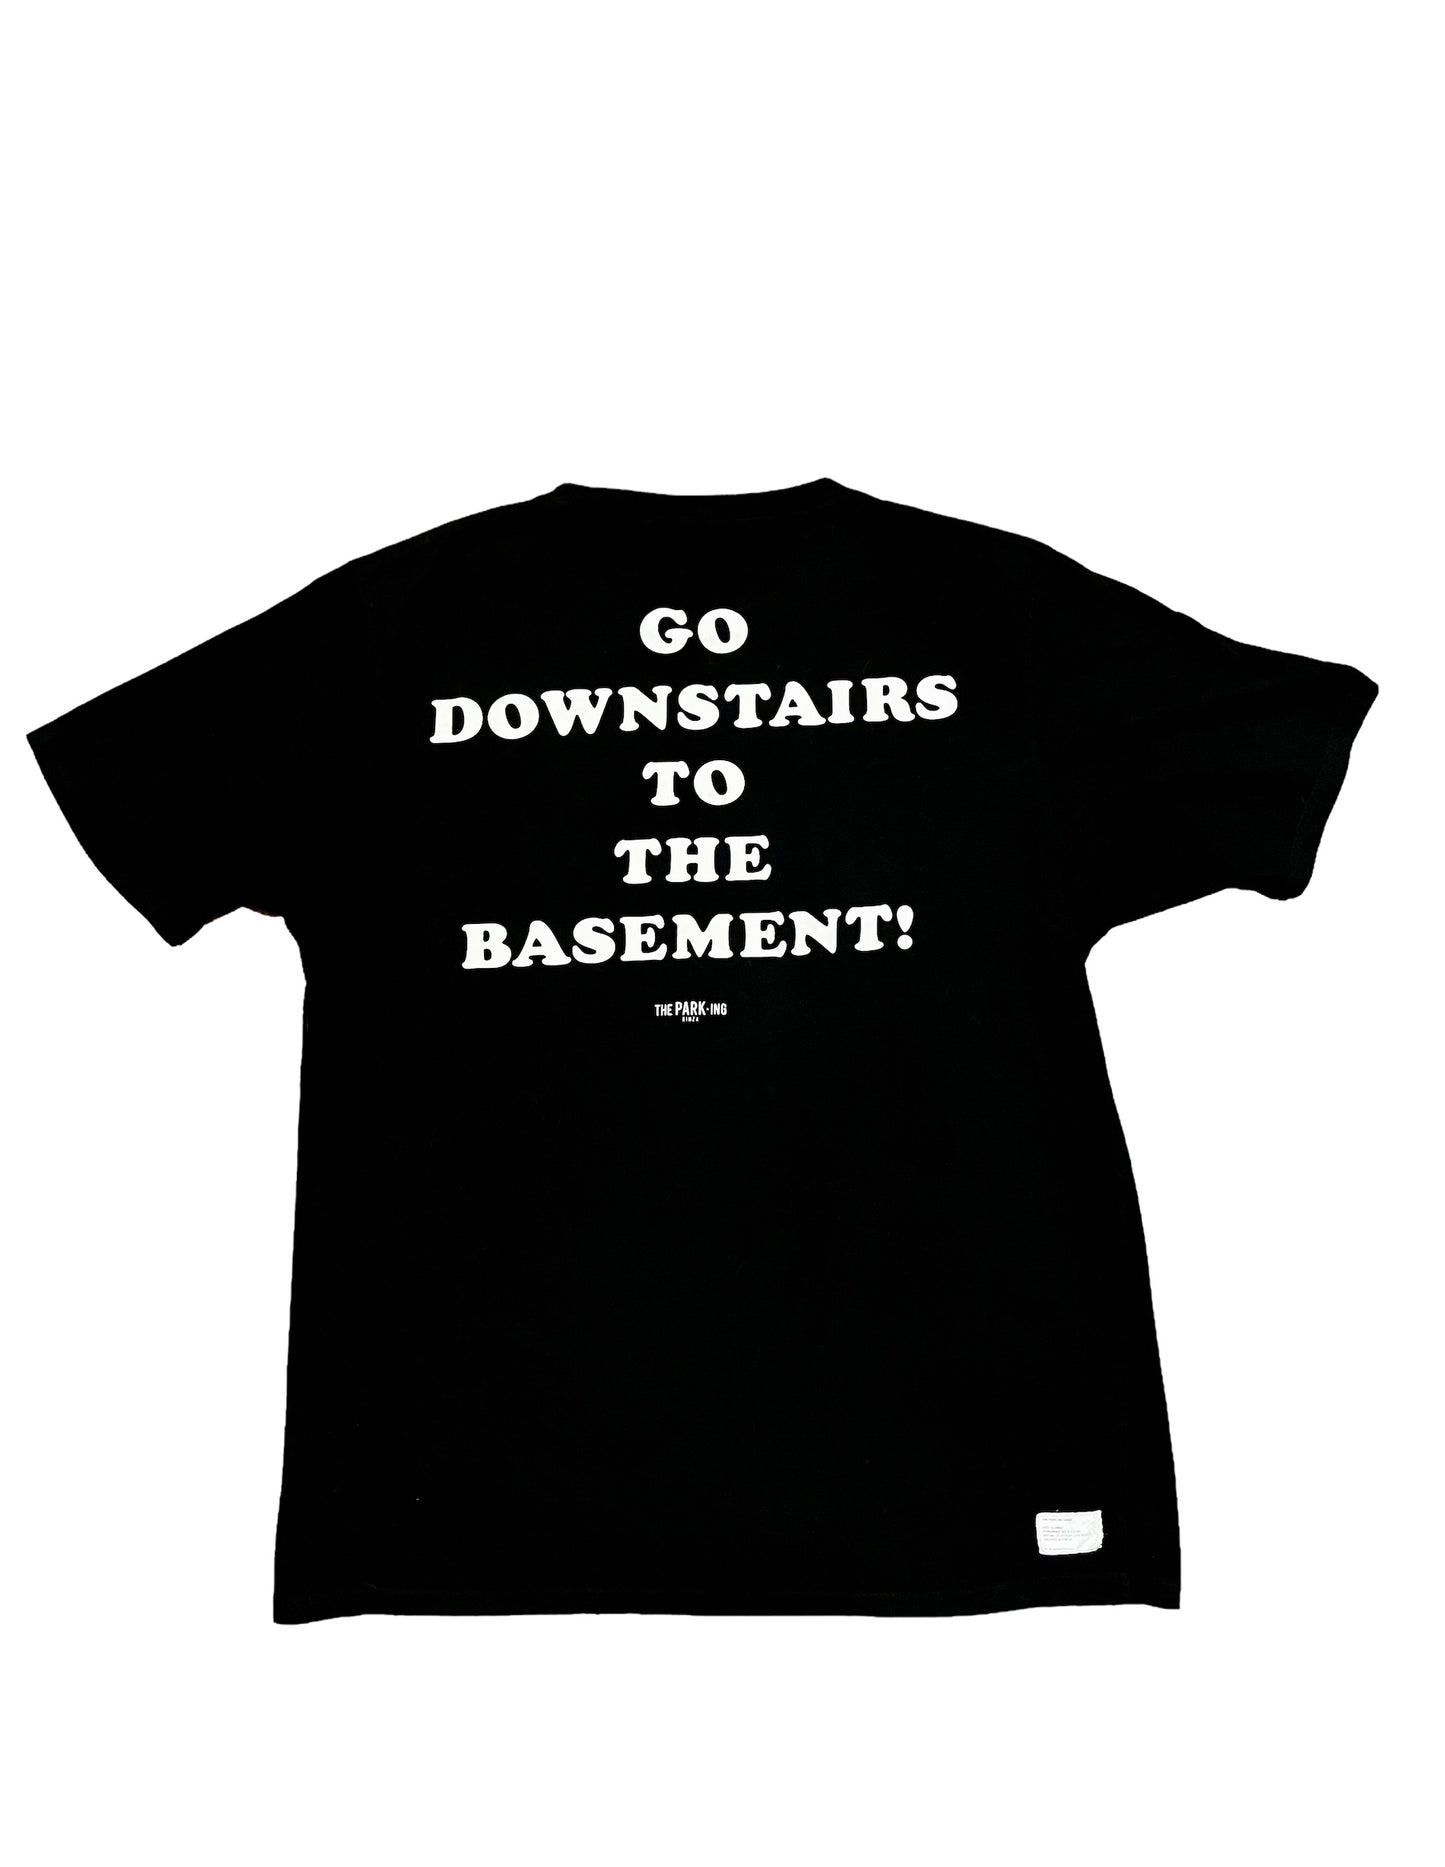 Making Music in the Basement Tee